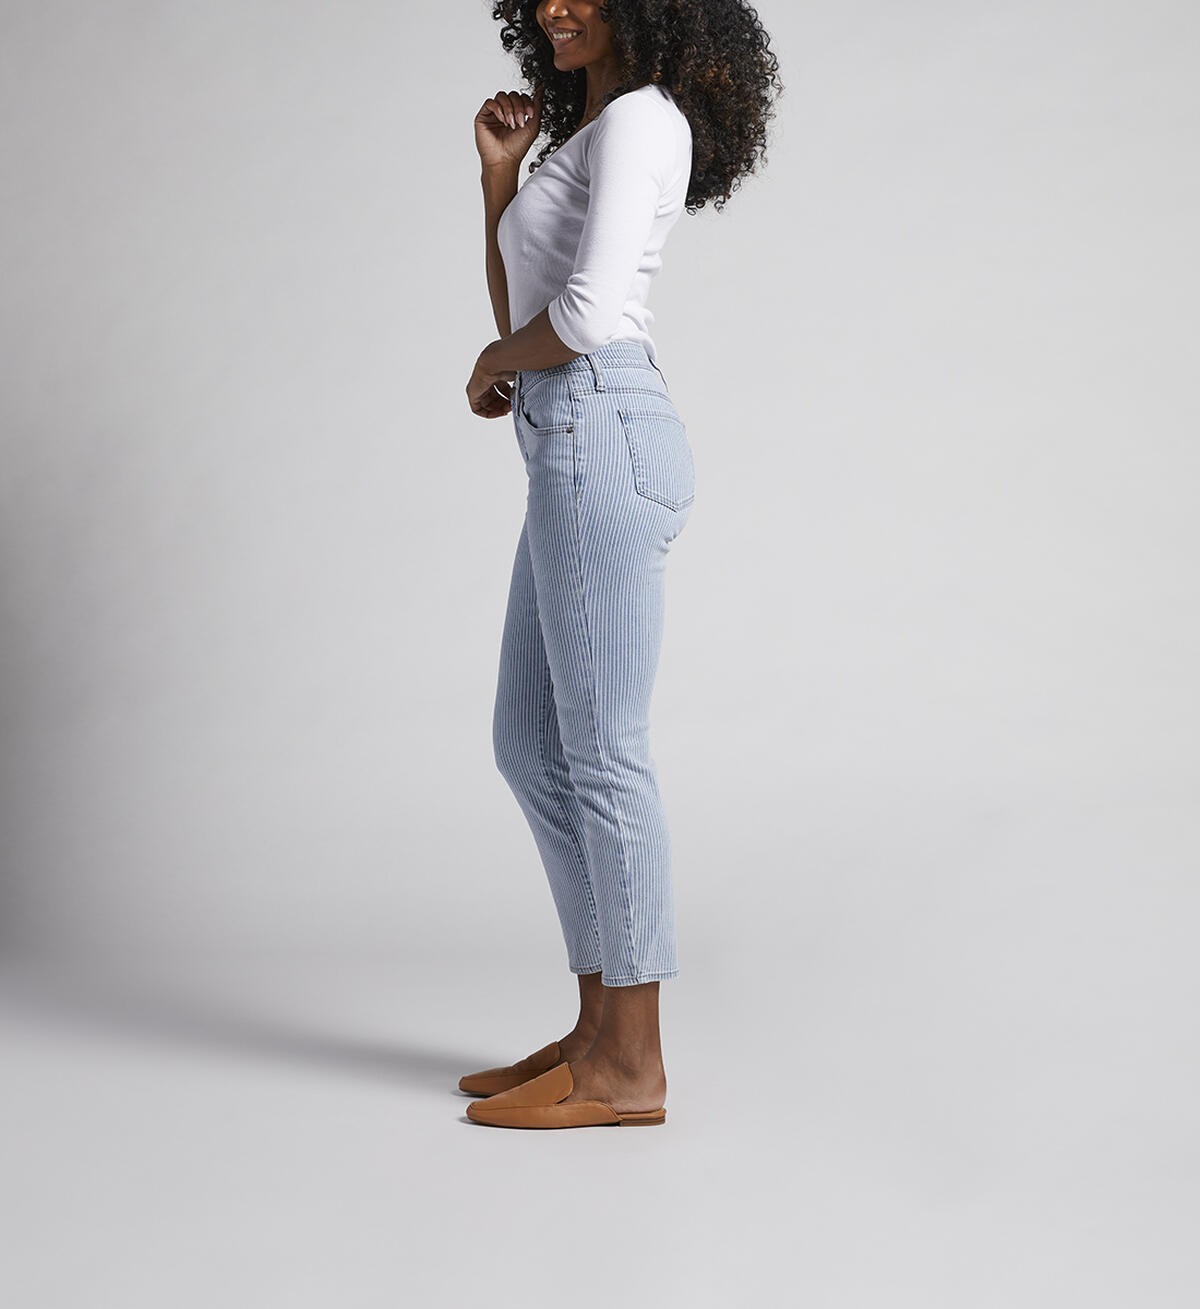 Cecilia Mid Rise Ankle Skinny Jeans, , hi-res image number 2